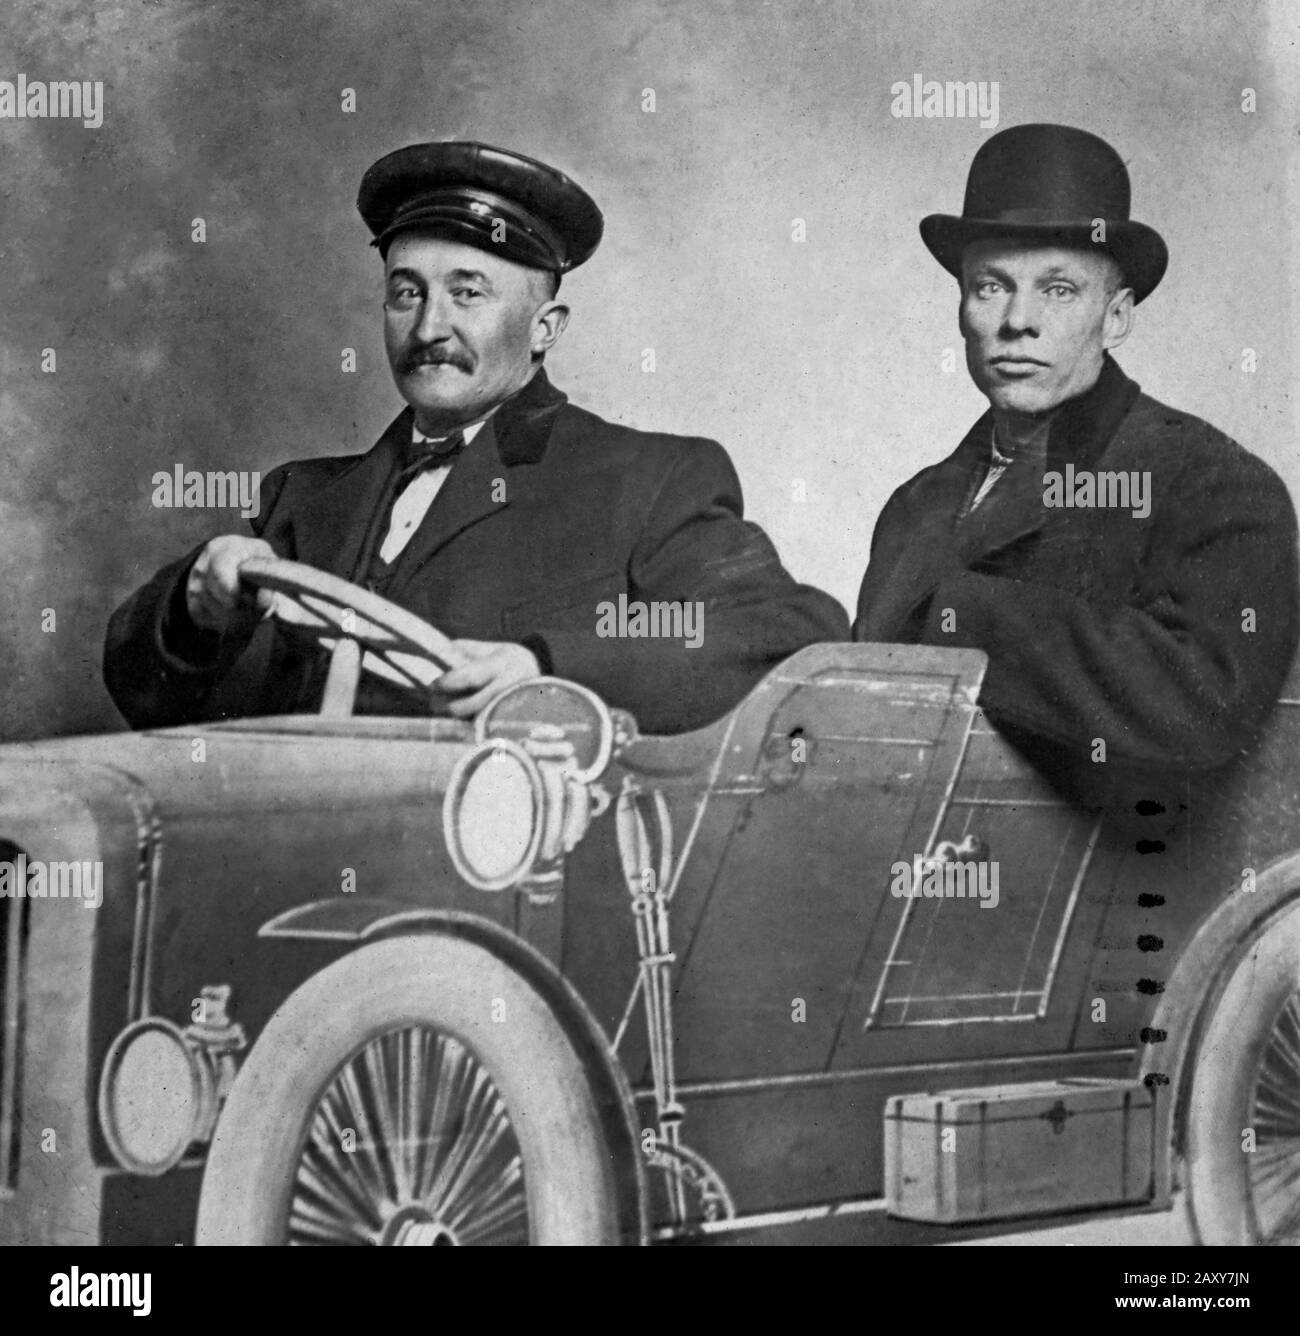 A dour  looking man poses with his 'chauffeur' behind an amusement park cut-out of a car, ca. 1905. Stock Photo